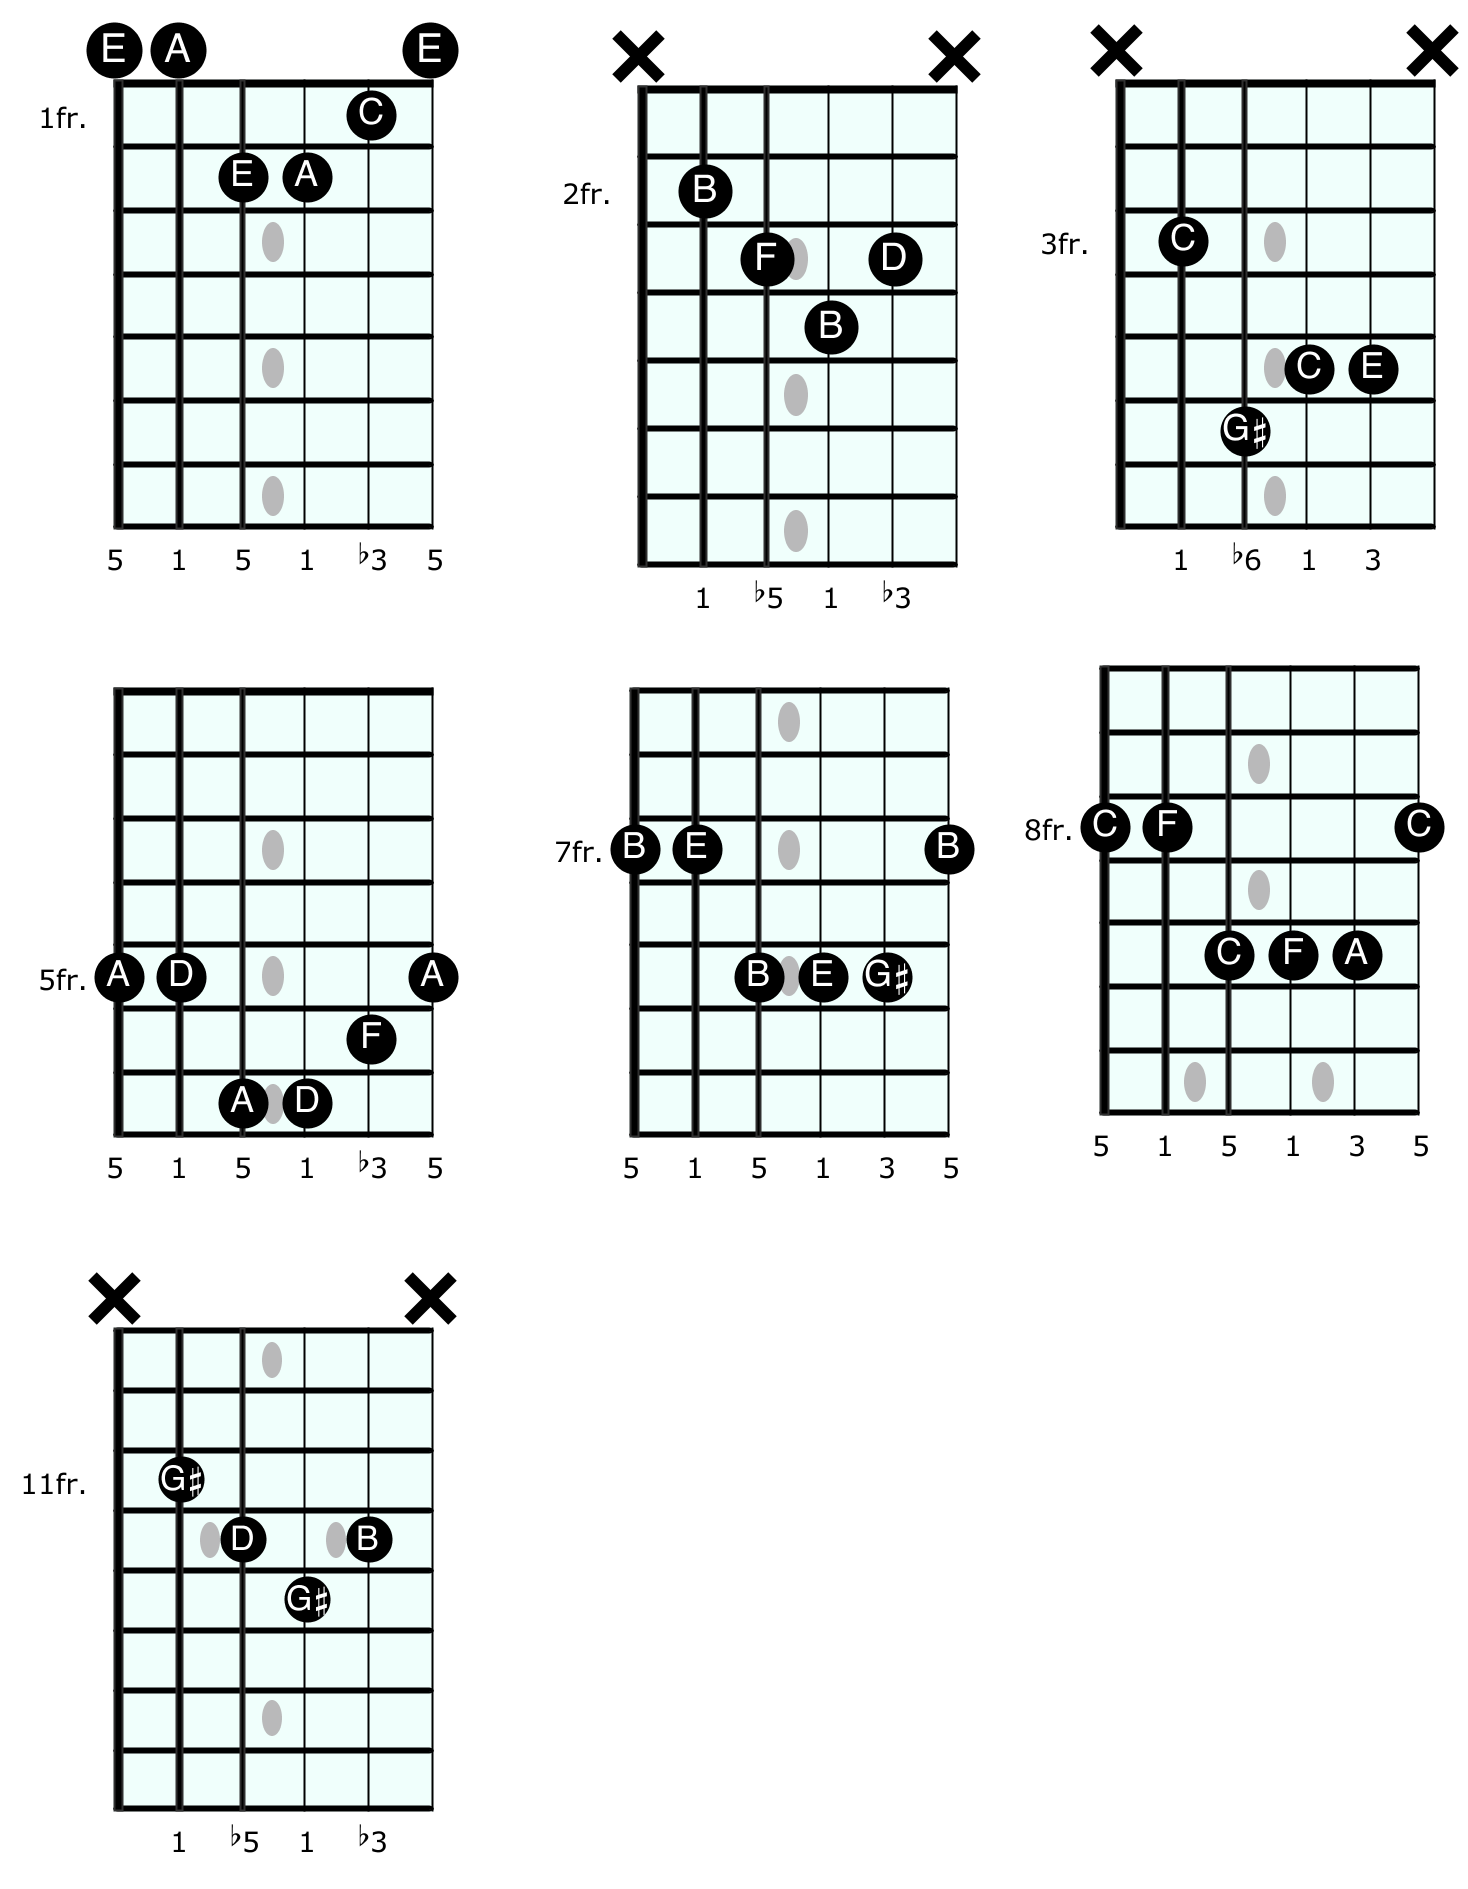 The chords in the A harmonic minor scale